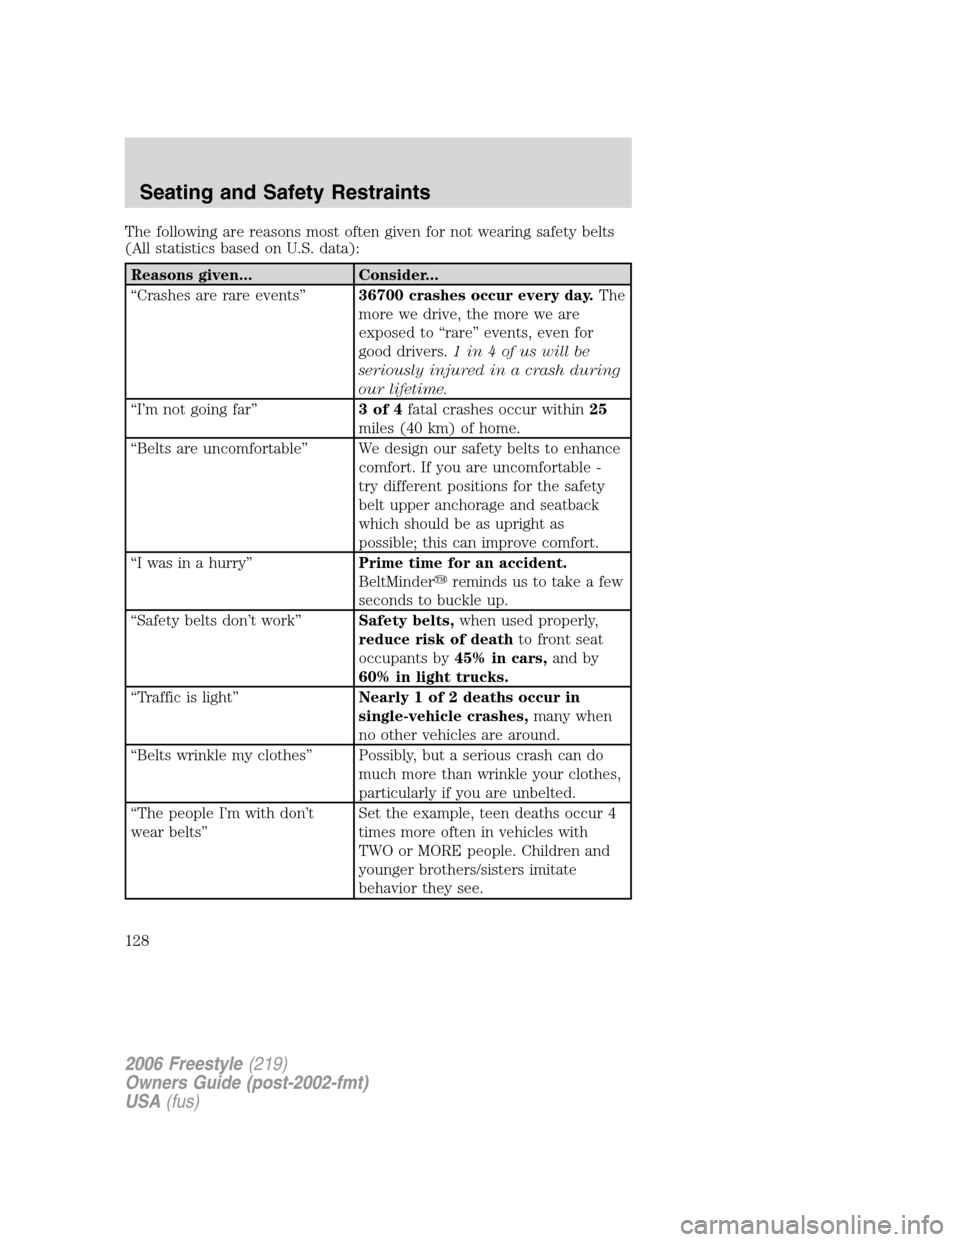 FORD FREESTYLE 2006 1.G Owners Manual The following are reasons most often given for not wearing safety belts
(All statistics based on U.S. data):
Reasons given... Consider...
“Crashes are rare events”36700 crashes occur every day.The